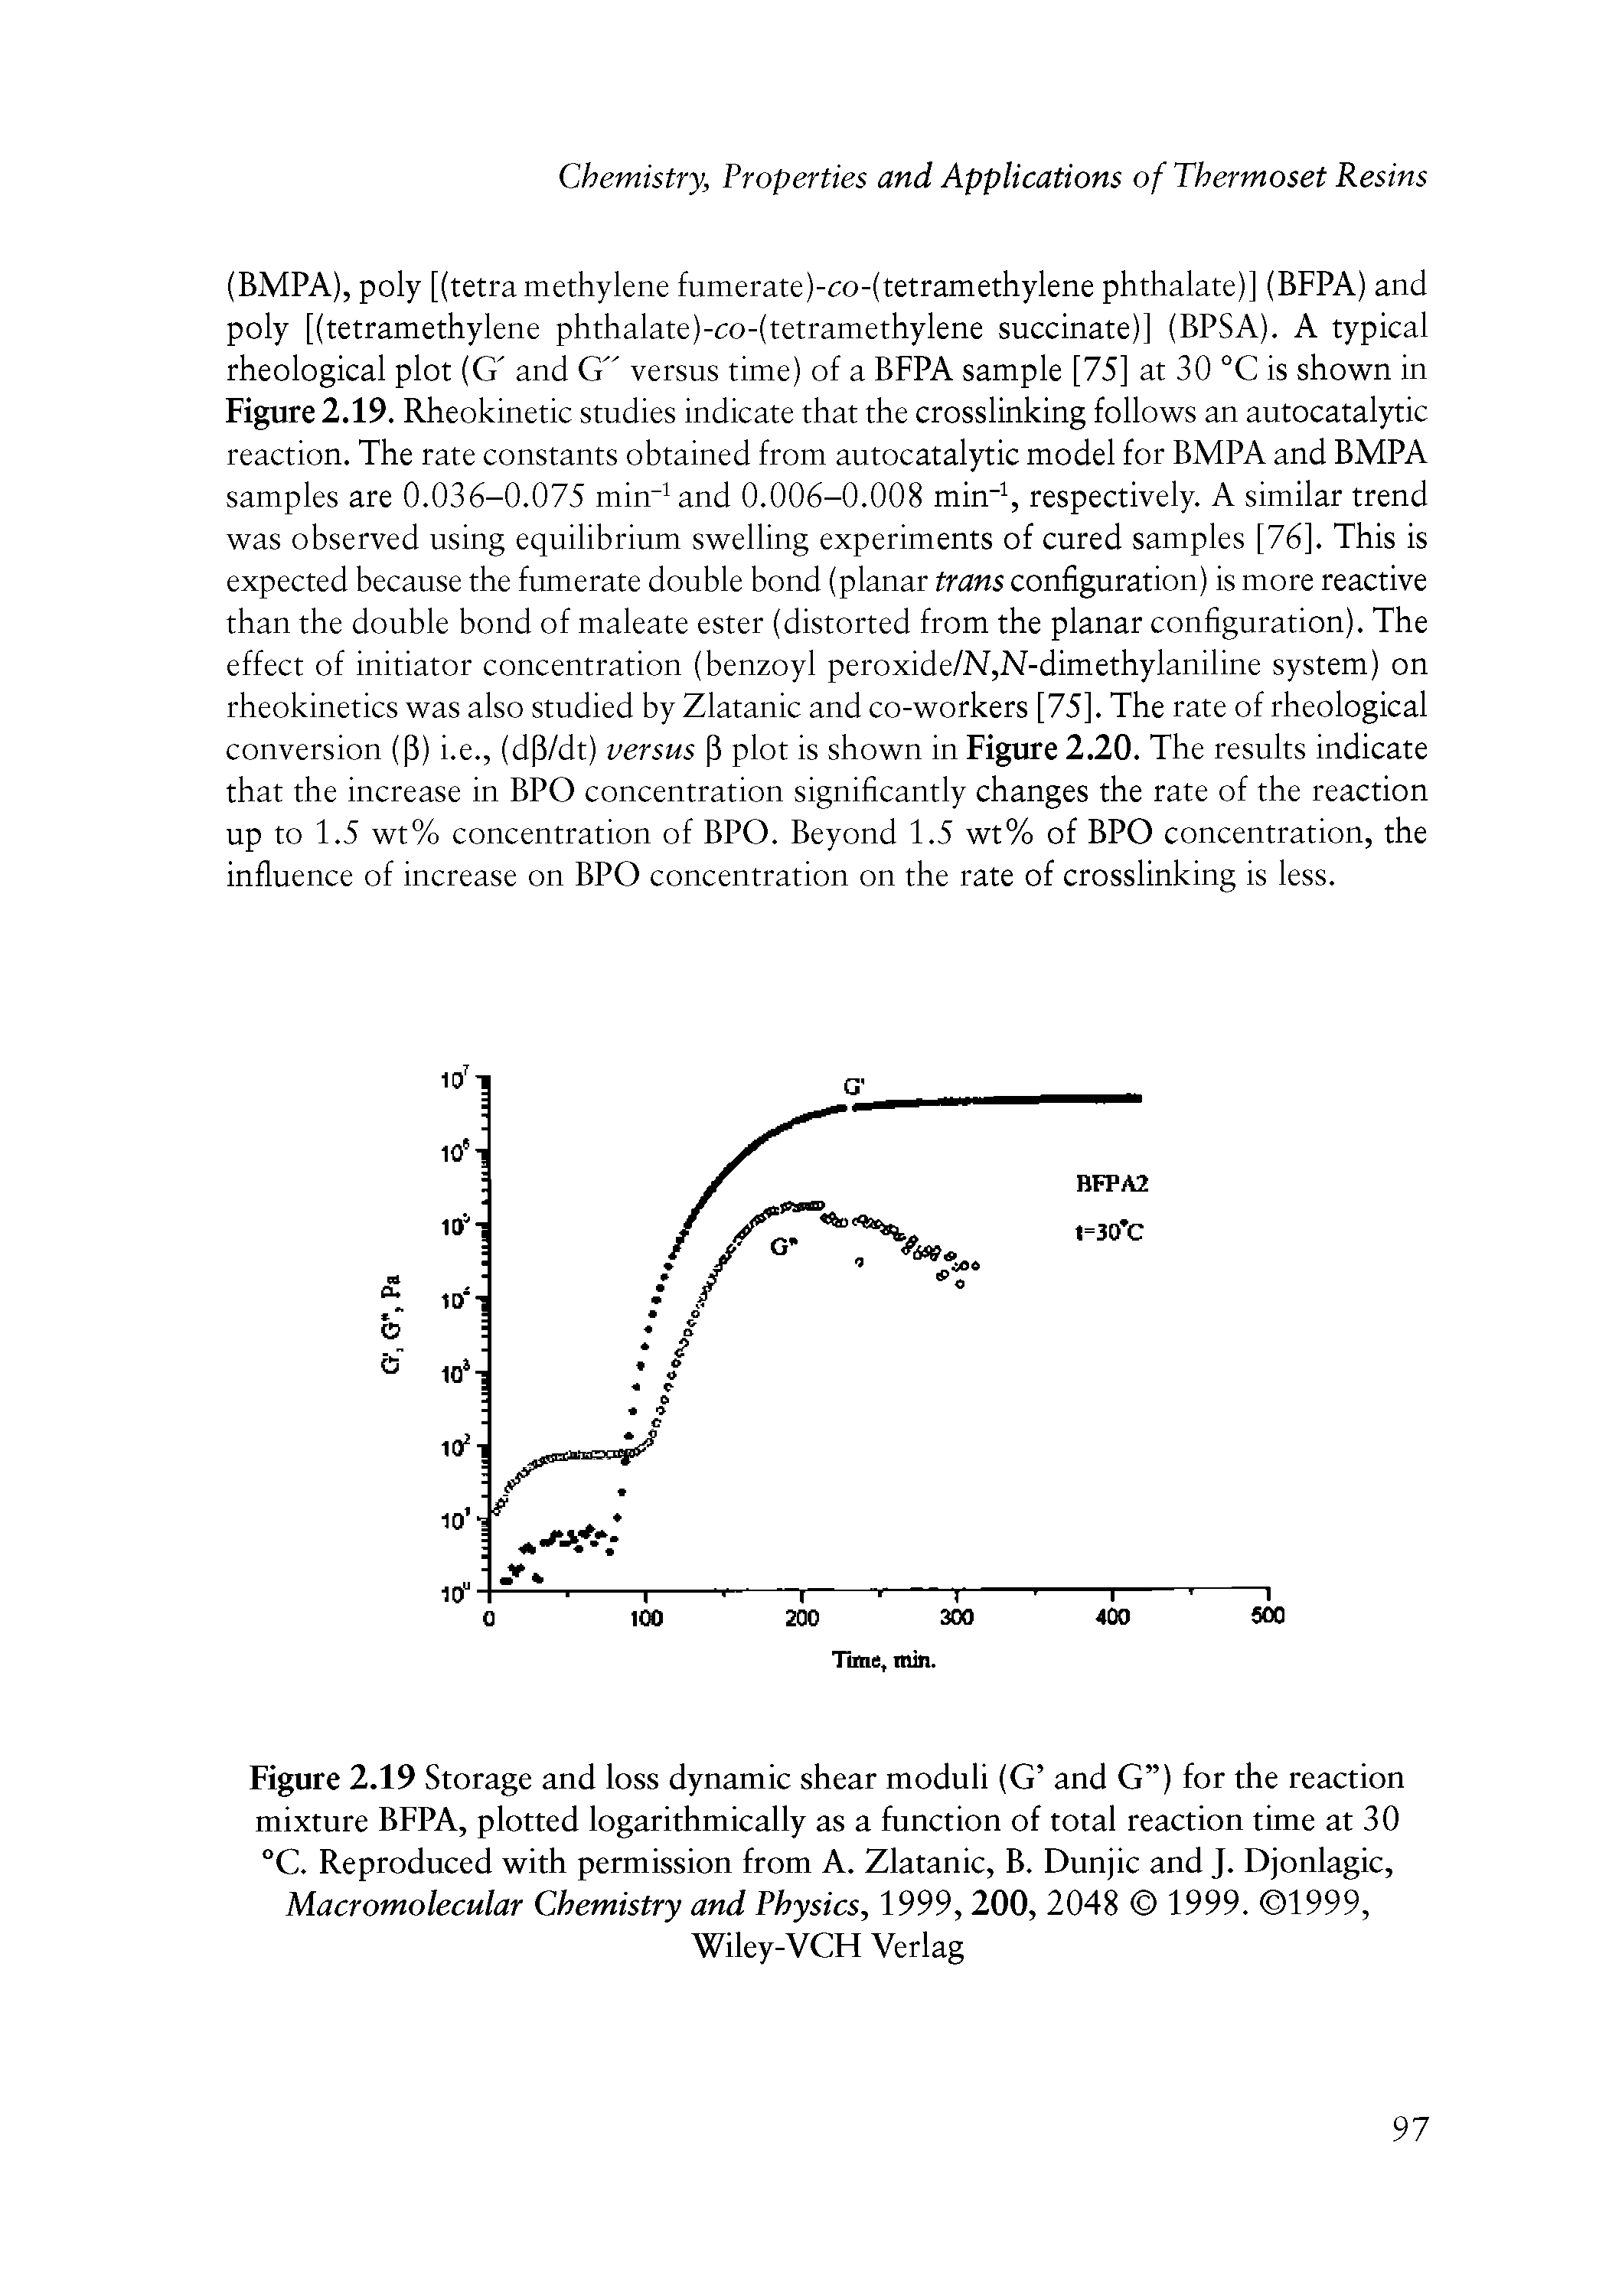 Figure 2.19 Storage and loss dynamic shear moduli (G and G ) for the reaction mixture BFPA, plotted logarithmically as a function of total reaction time at 30 "C. Reproduced with permission from A. Zlatanic, B. Dunjic and J. Djonlagic, Macromolecular Chemistry and Physics, 1999,200, 2048 1999. 1999,...